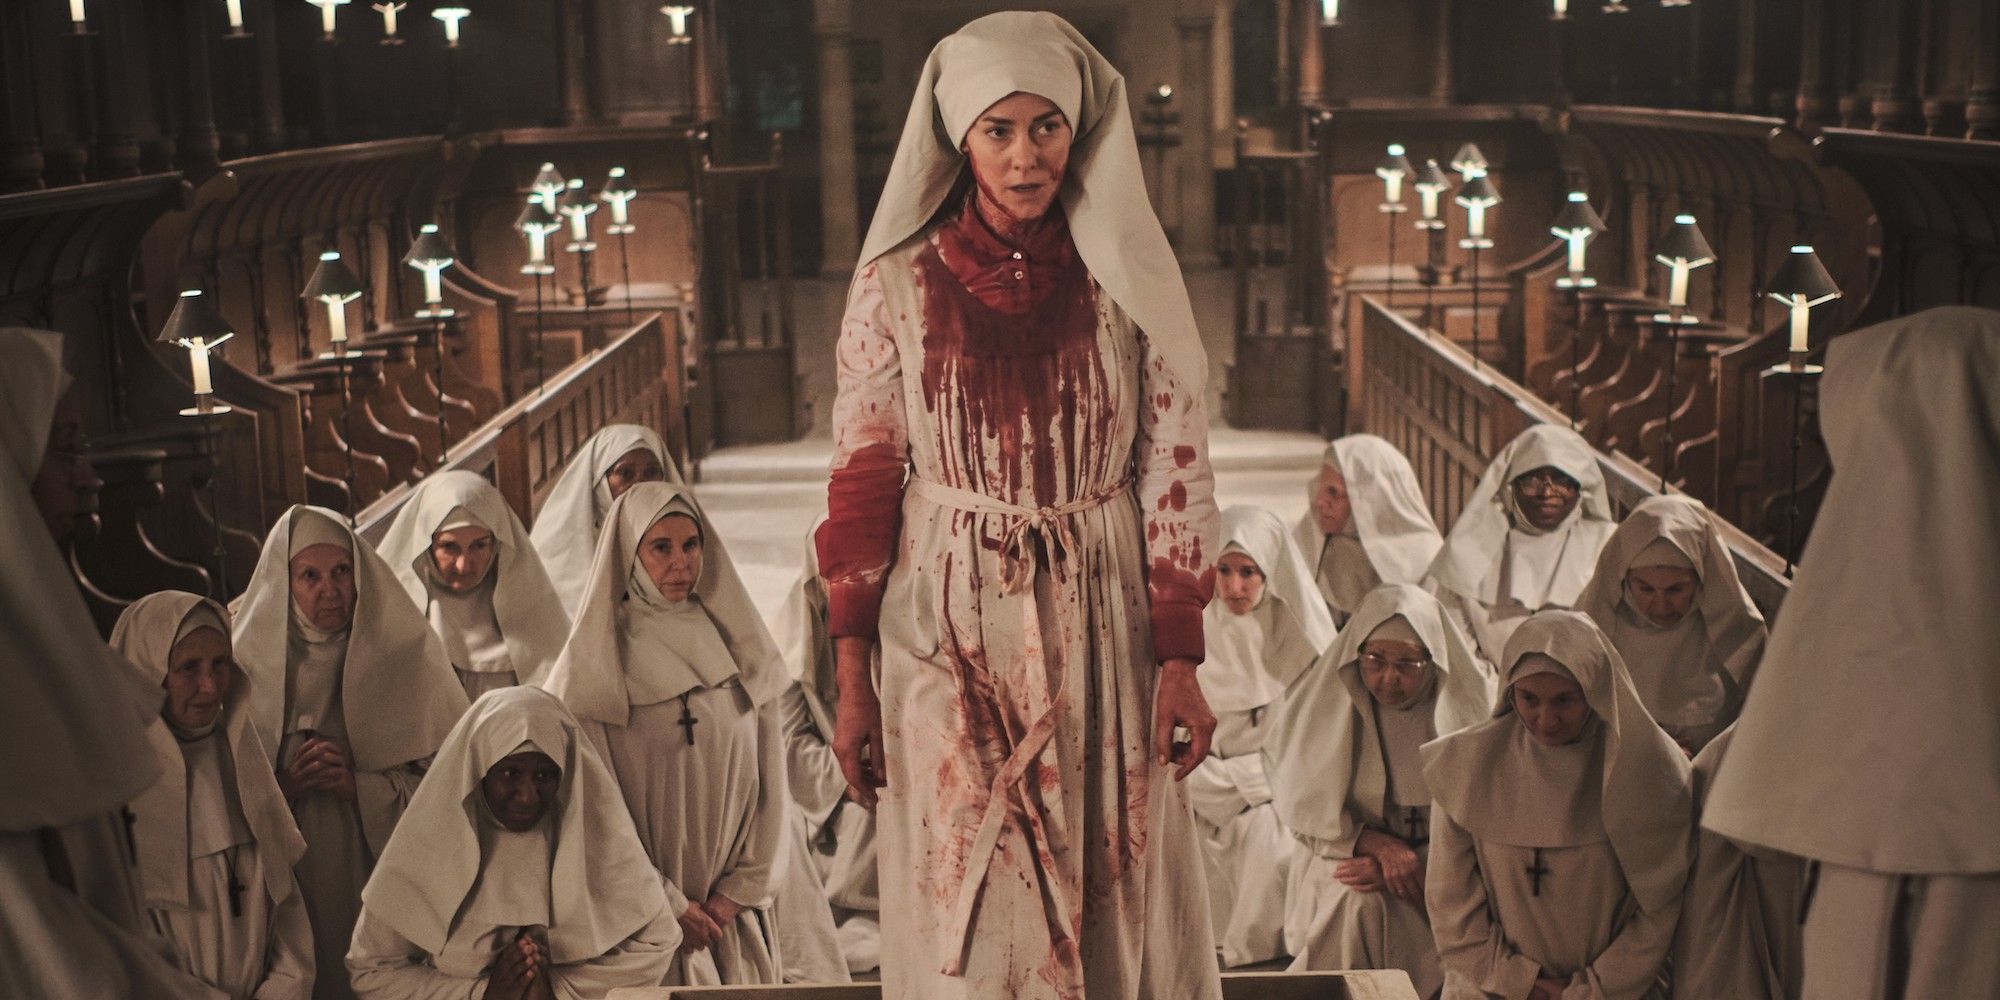 Consecration Review: Jena Malone Anchors Compelling, Uneven Religious Horror 